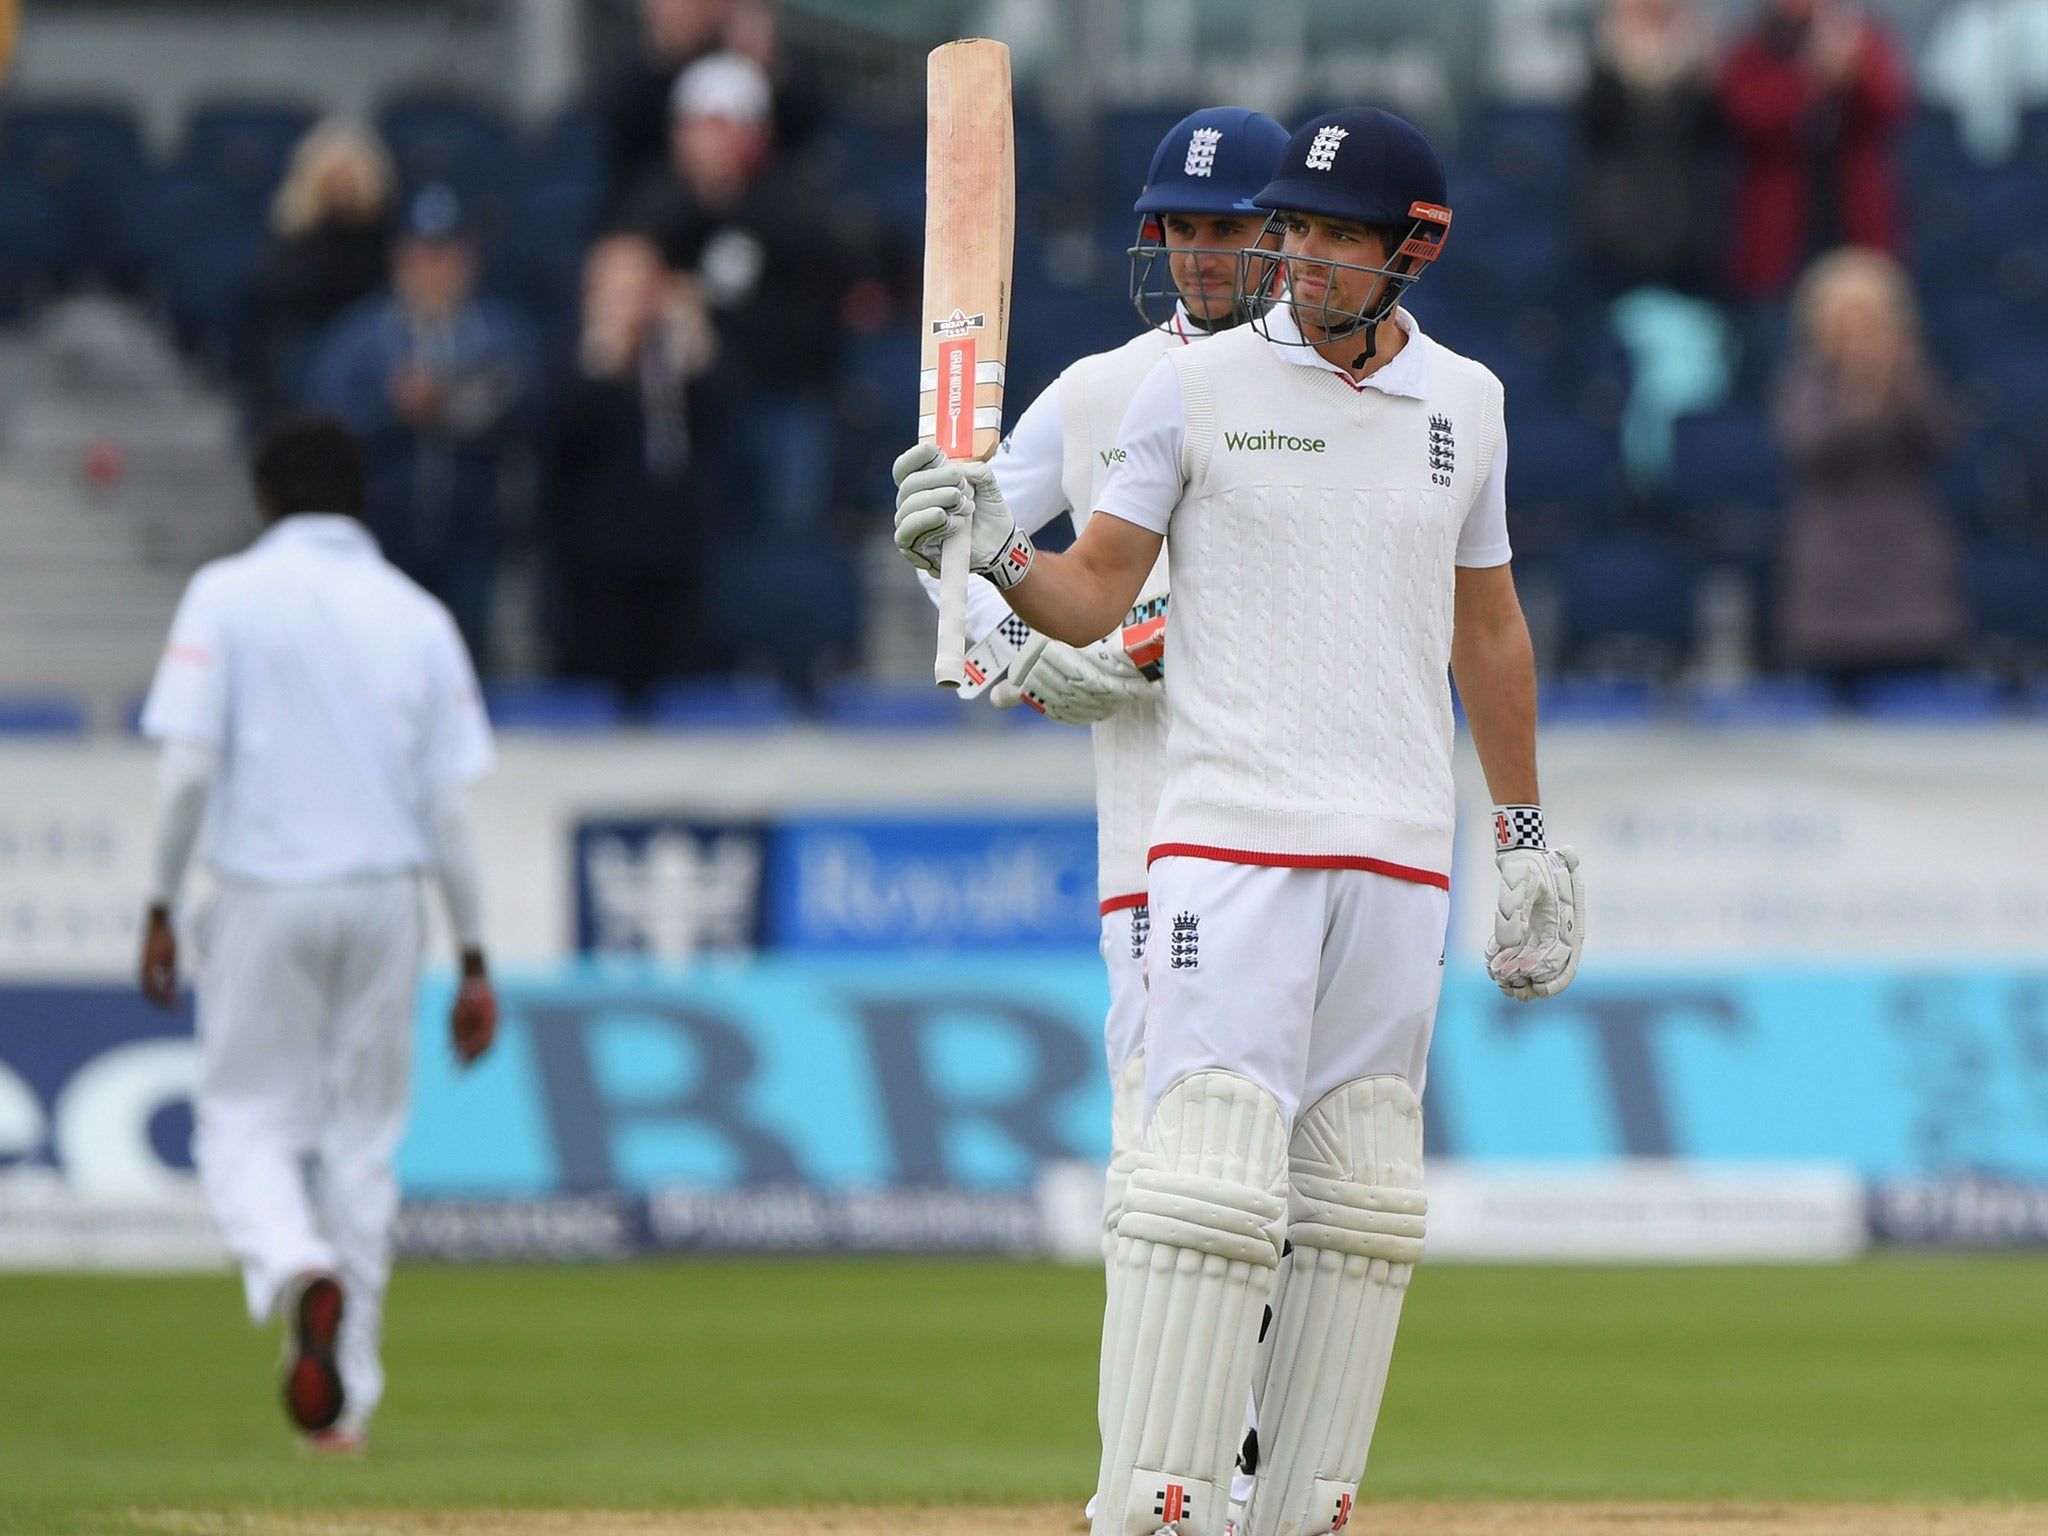 Alastair Cook salutes the crowd after reaching 10,000 Test runs